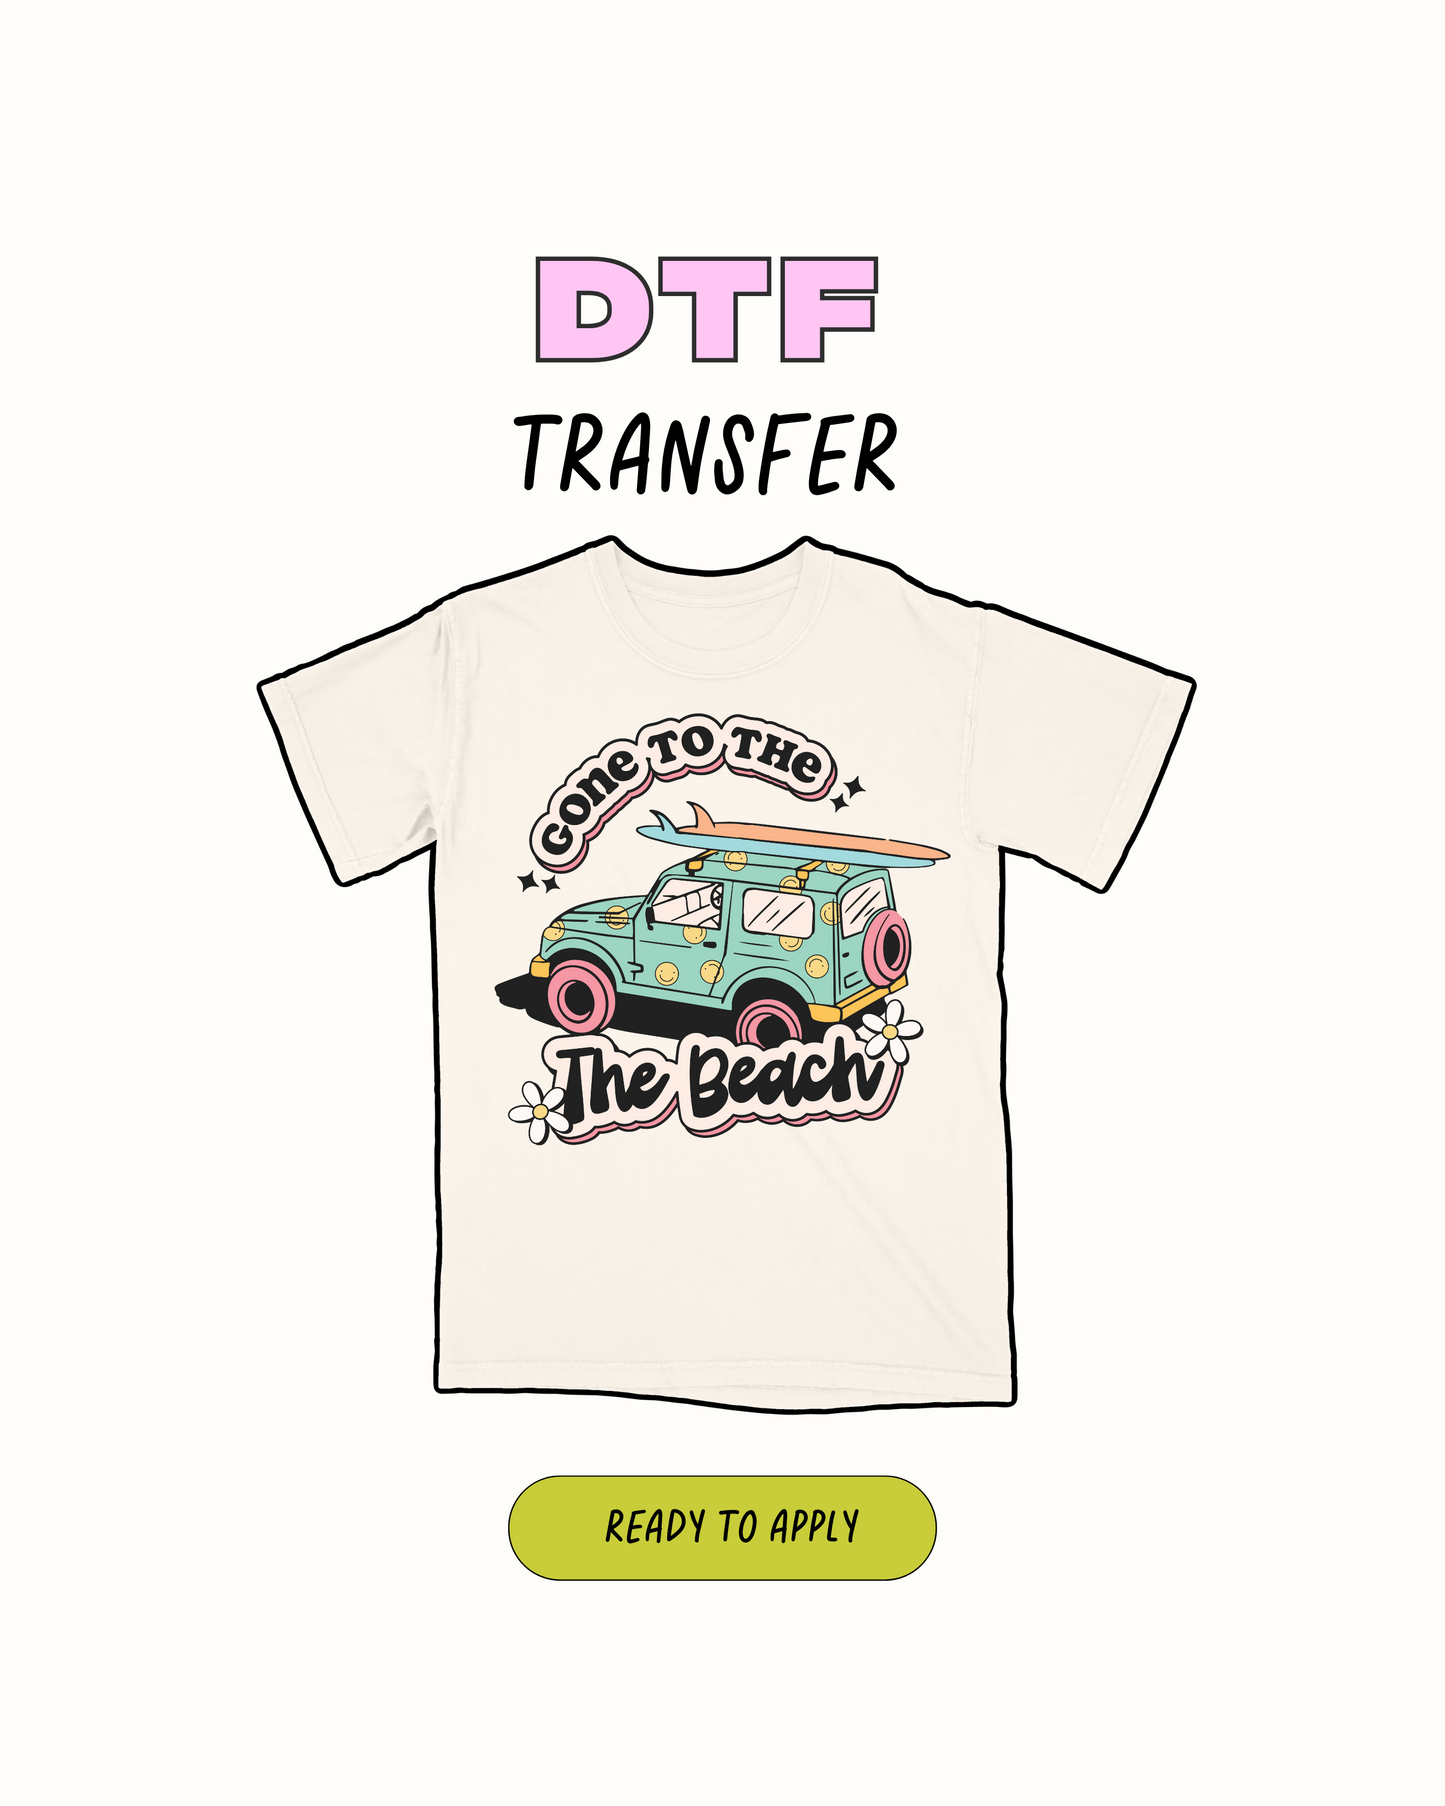 Gone to the beach  - DTF Transfer